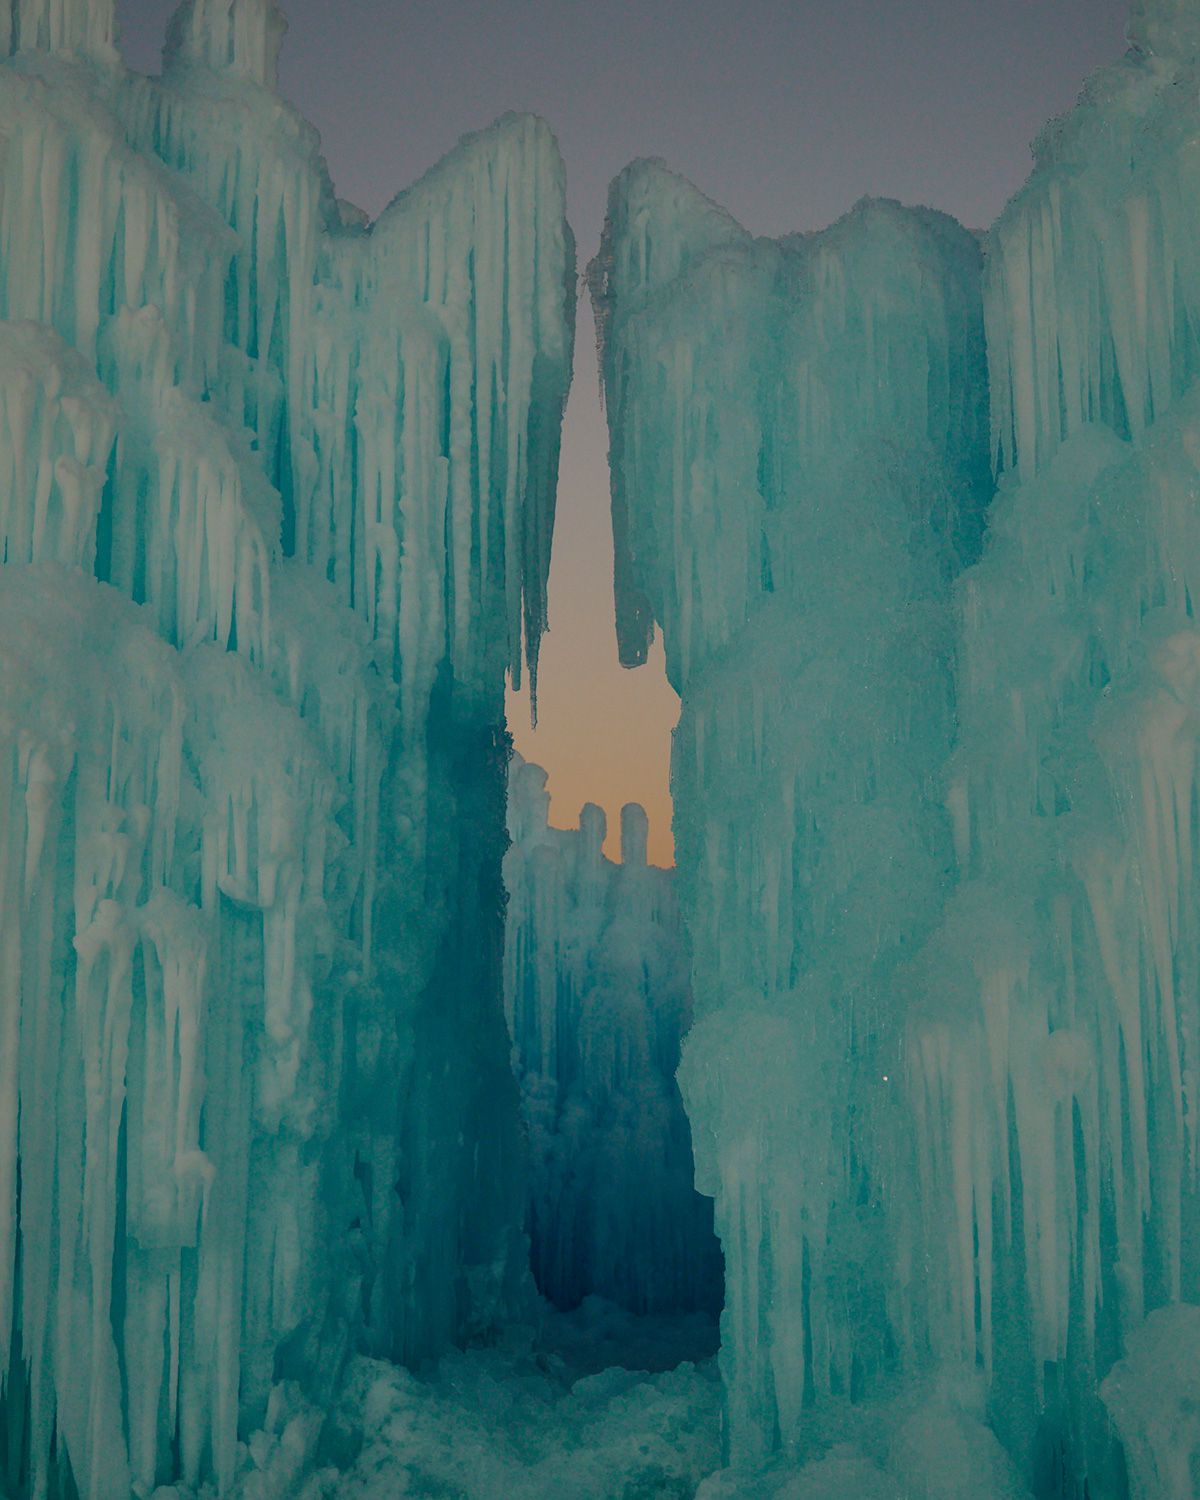 Castles Of Ice Splendid Photography Series By Frankie Carino 4